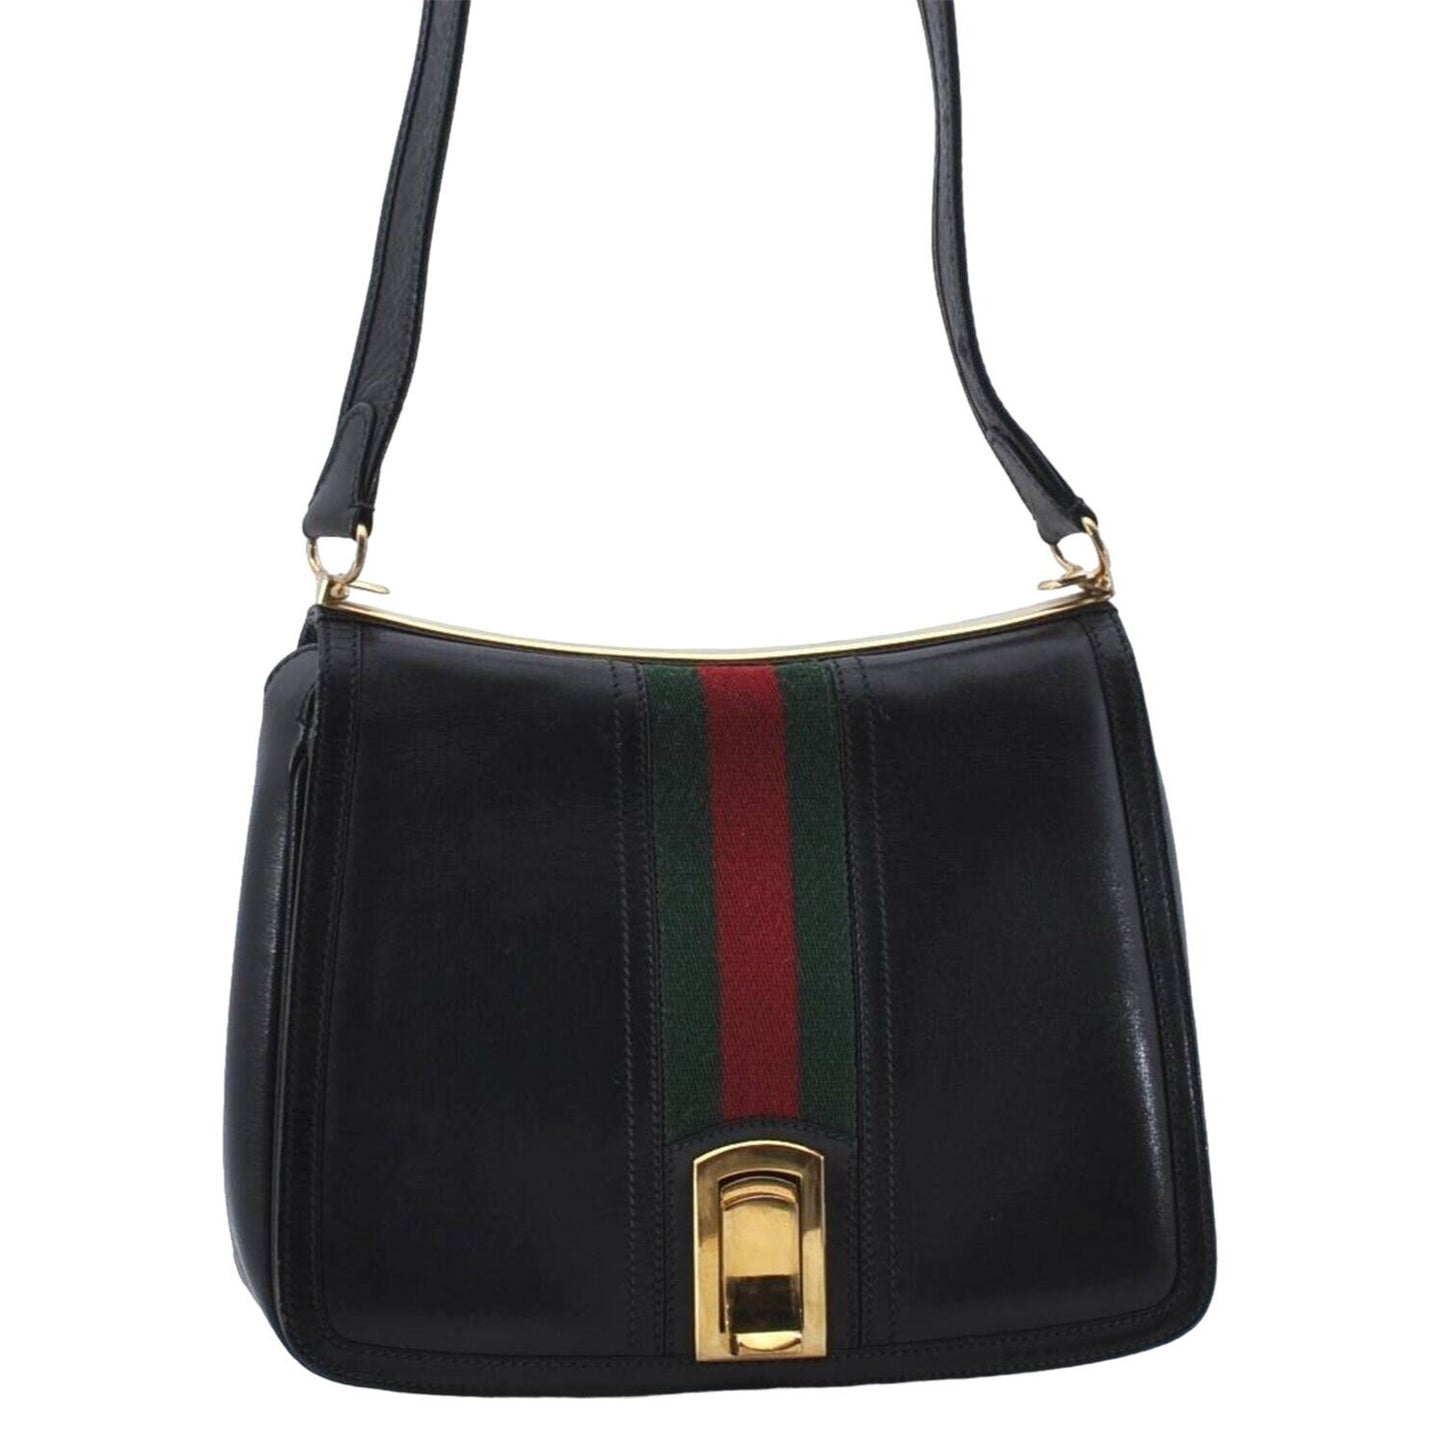 Vintage, RARE, Gucci, mod, black leather, saddle bag shoulder purse with a wide red & green center stripe, and bold gold accents g